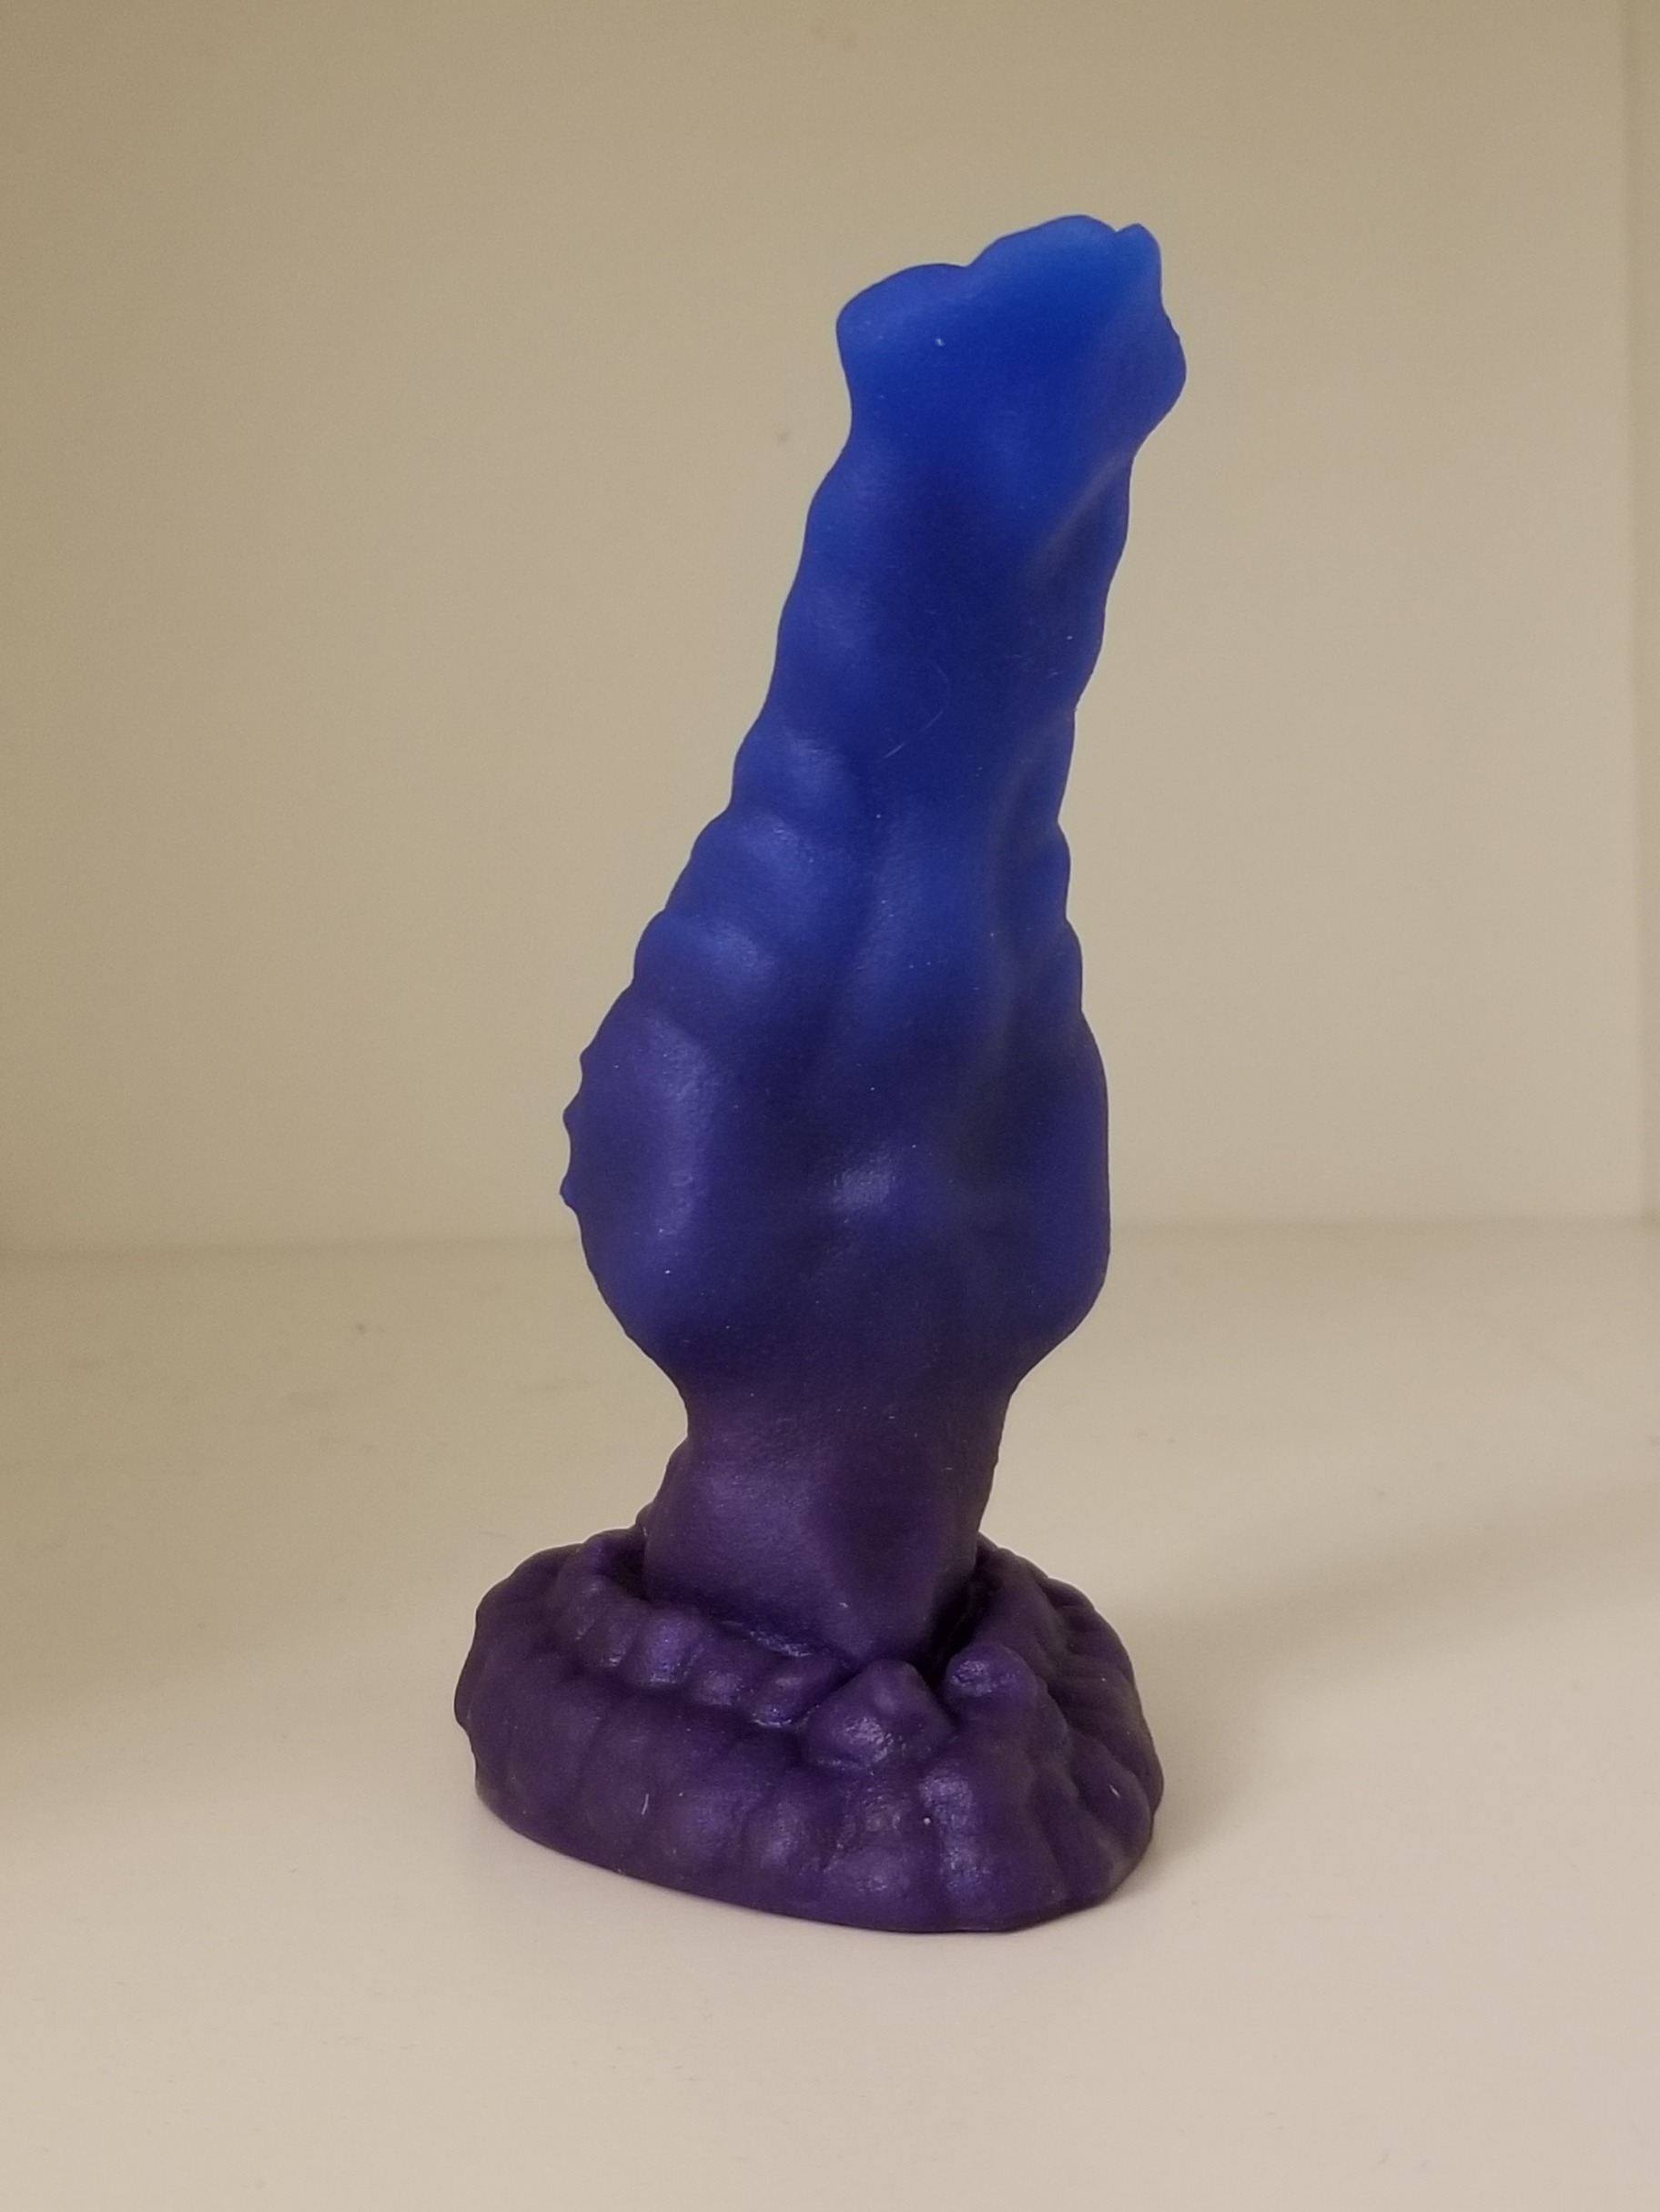 GUESS WHO GOT THEIR FIRST BAD DRAGON TOY?! 💦little-naughty-pisser💦